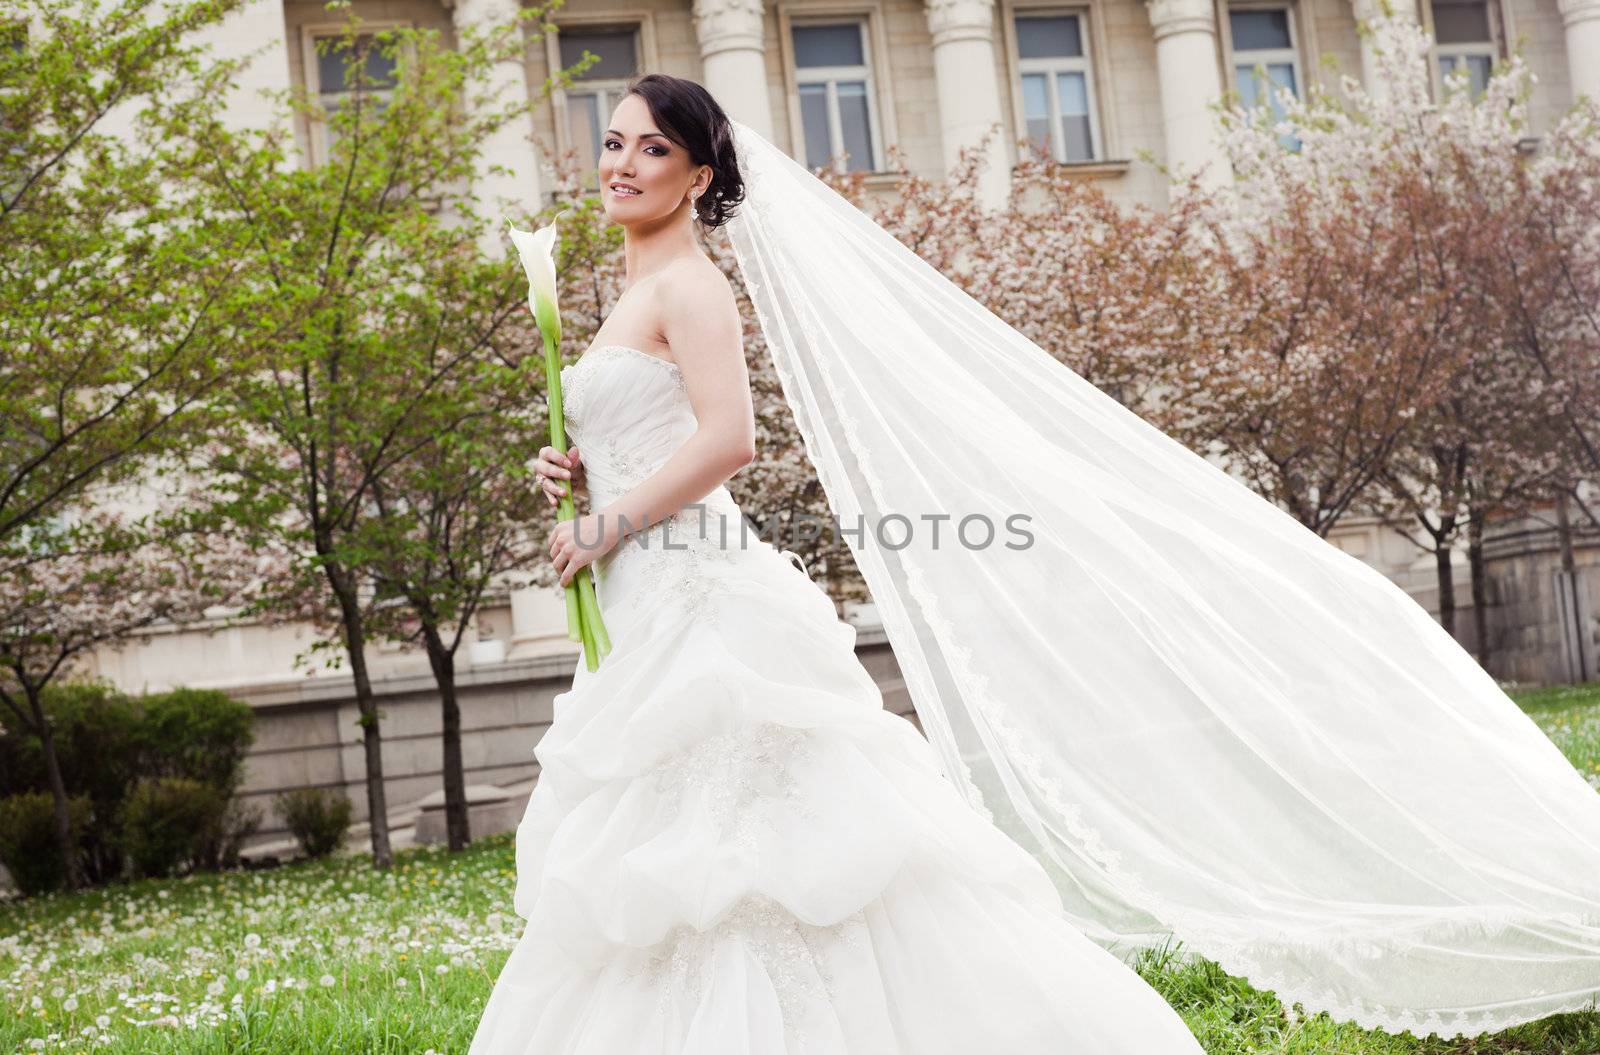 Happy bride with wedding dress and long veil holding white calla lilly